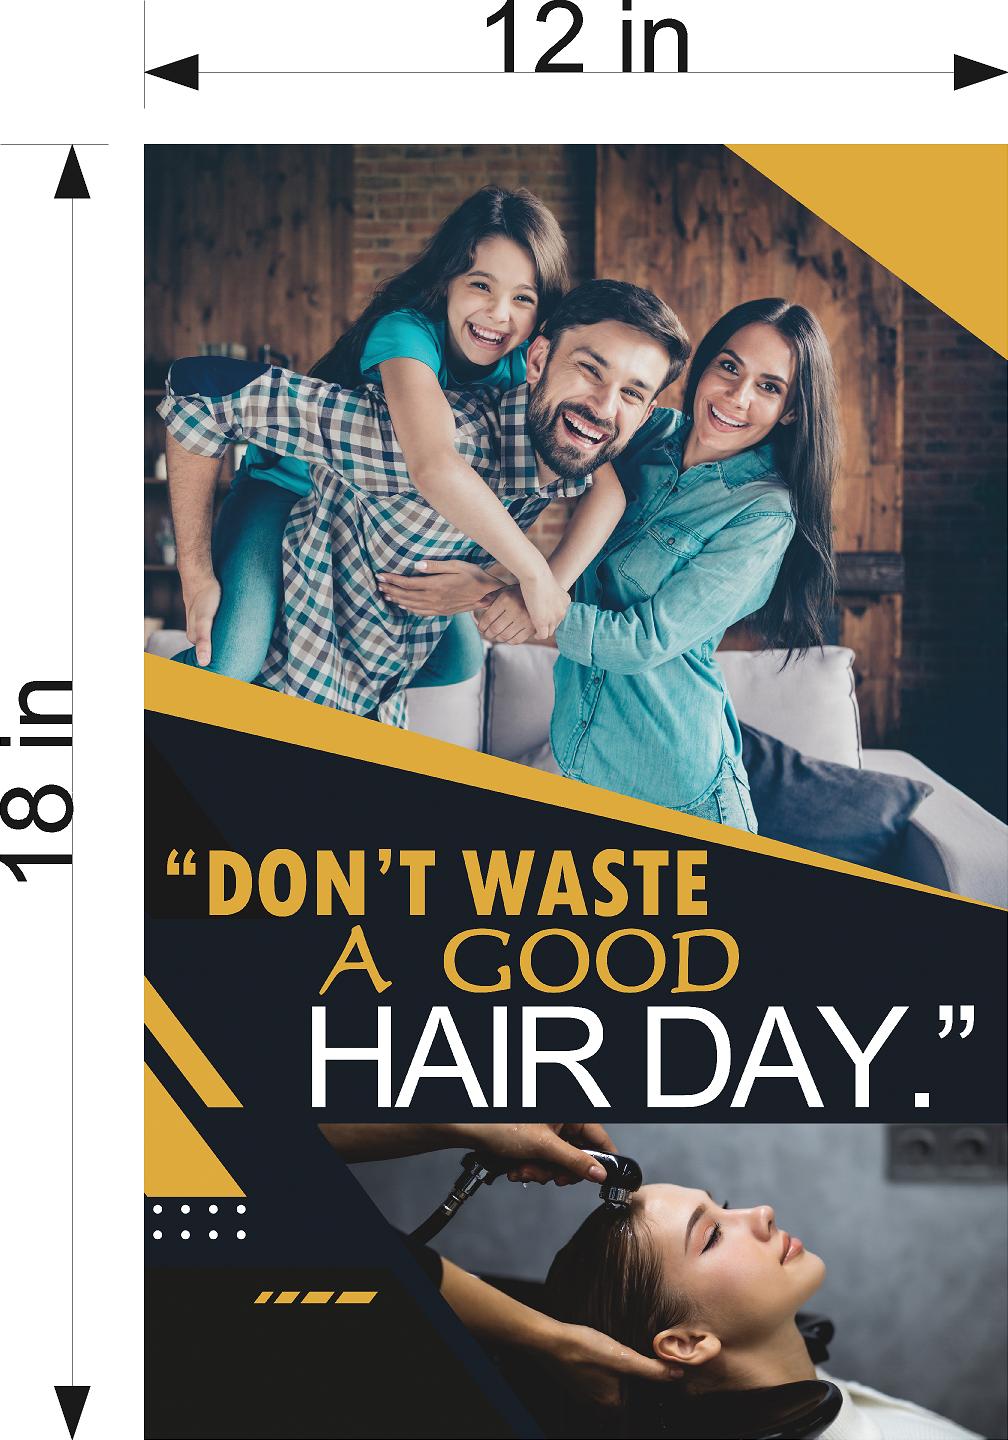 Family Hair 03 Wallpaper Poster Decal with Adhesive Backing Wall Decor Indoors Interior Sign Haircut Vertical